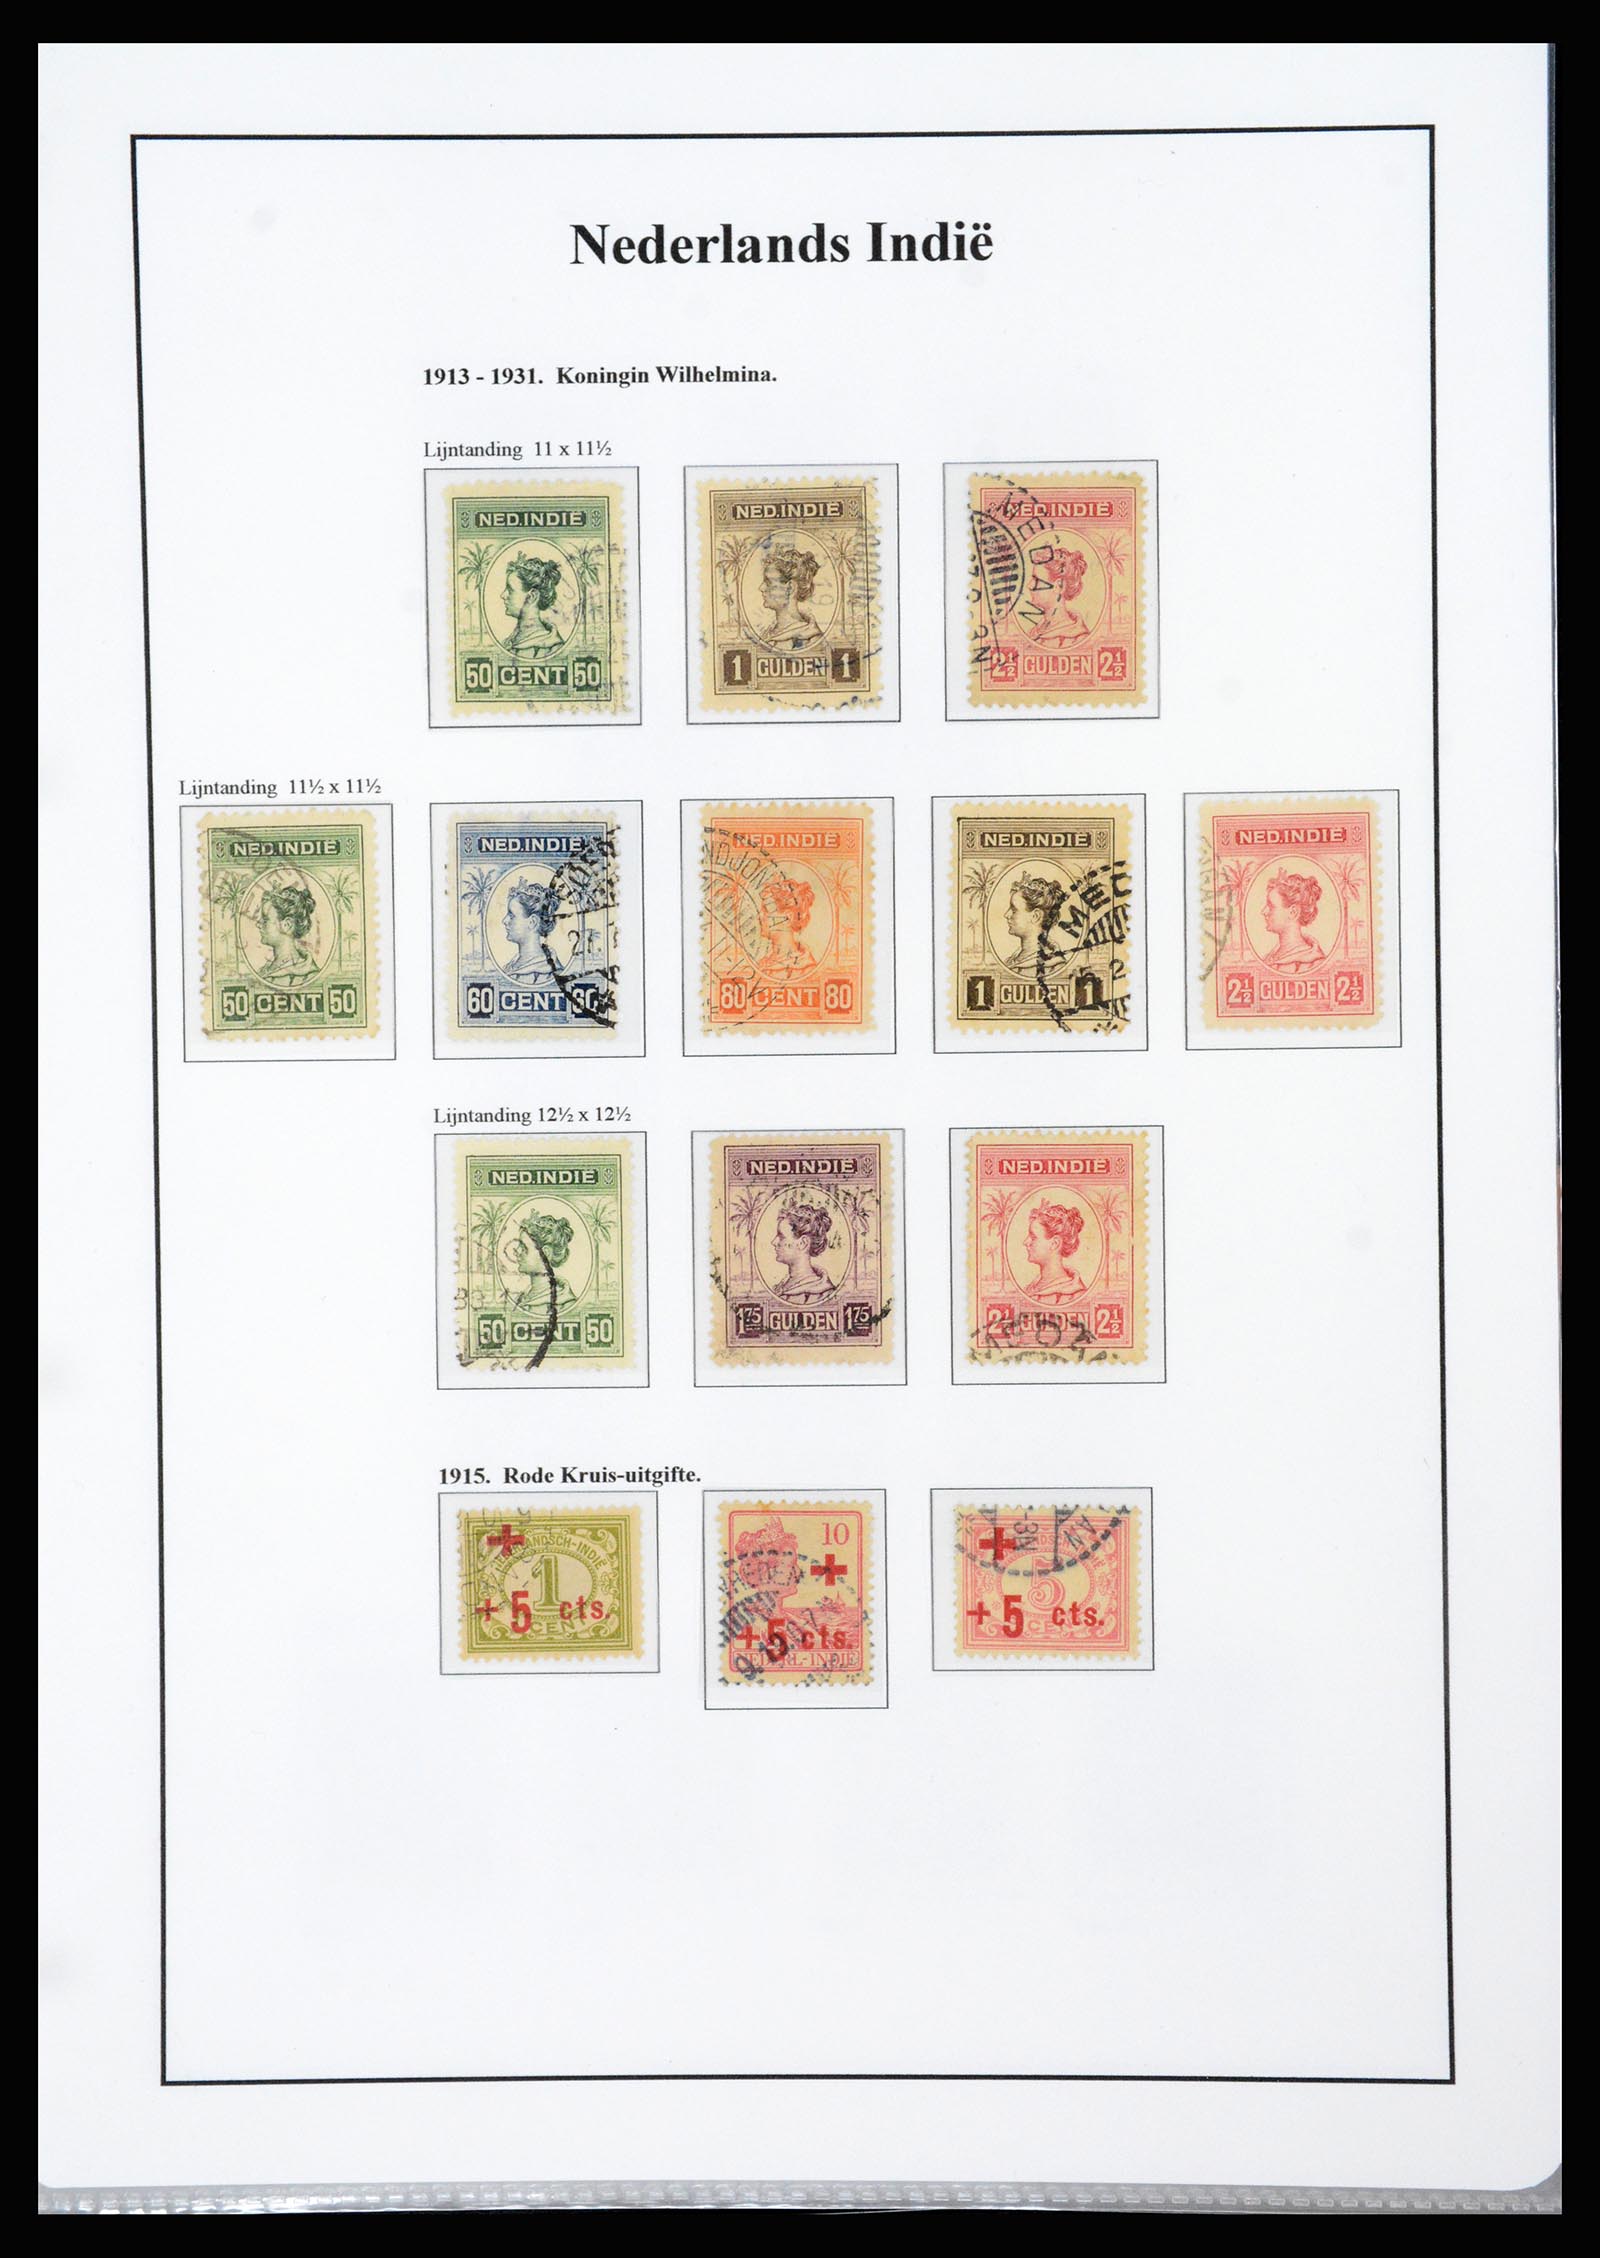 37247 011 - Stamp collection 37247 Dutch east Indies 1864-1949.